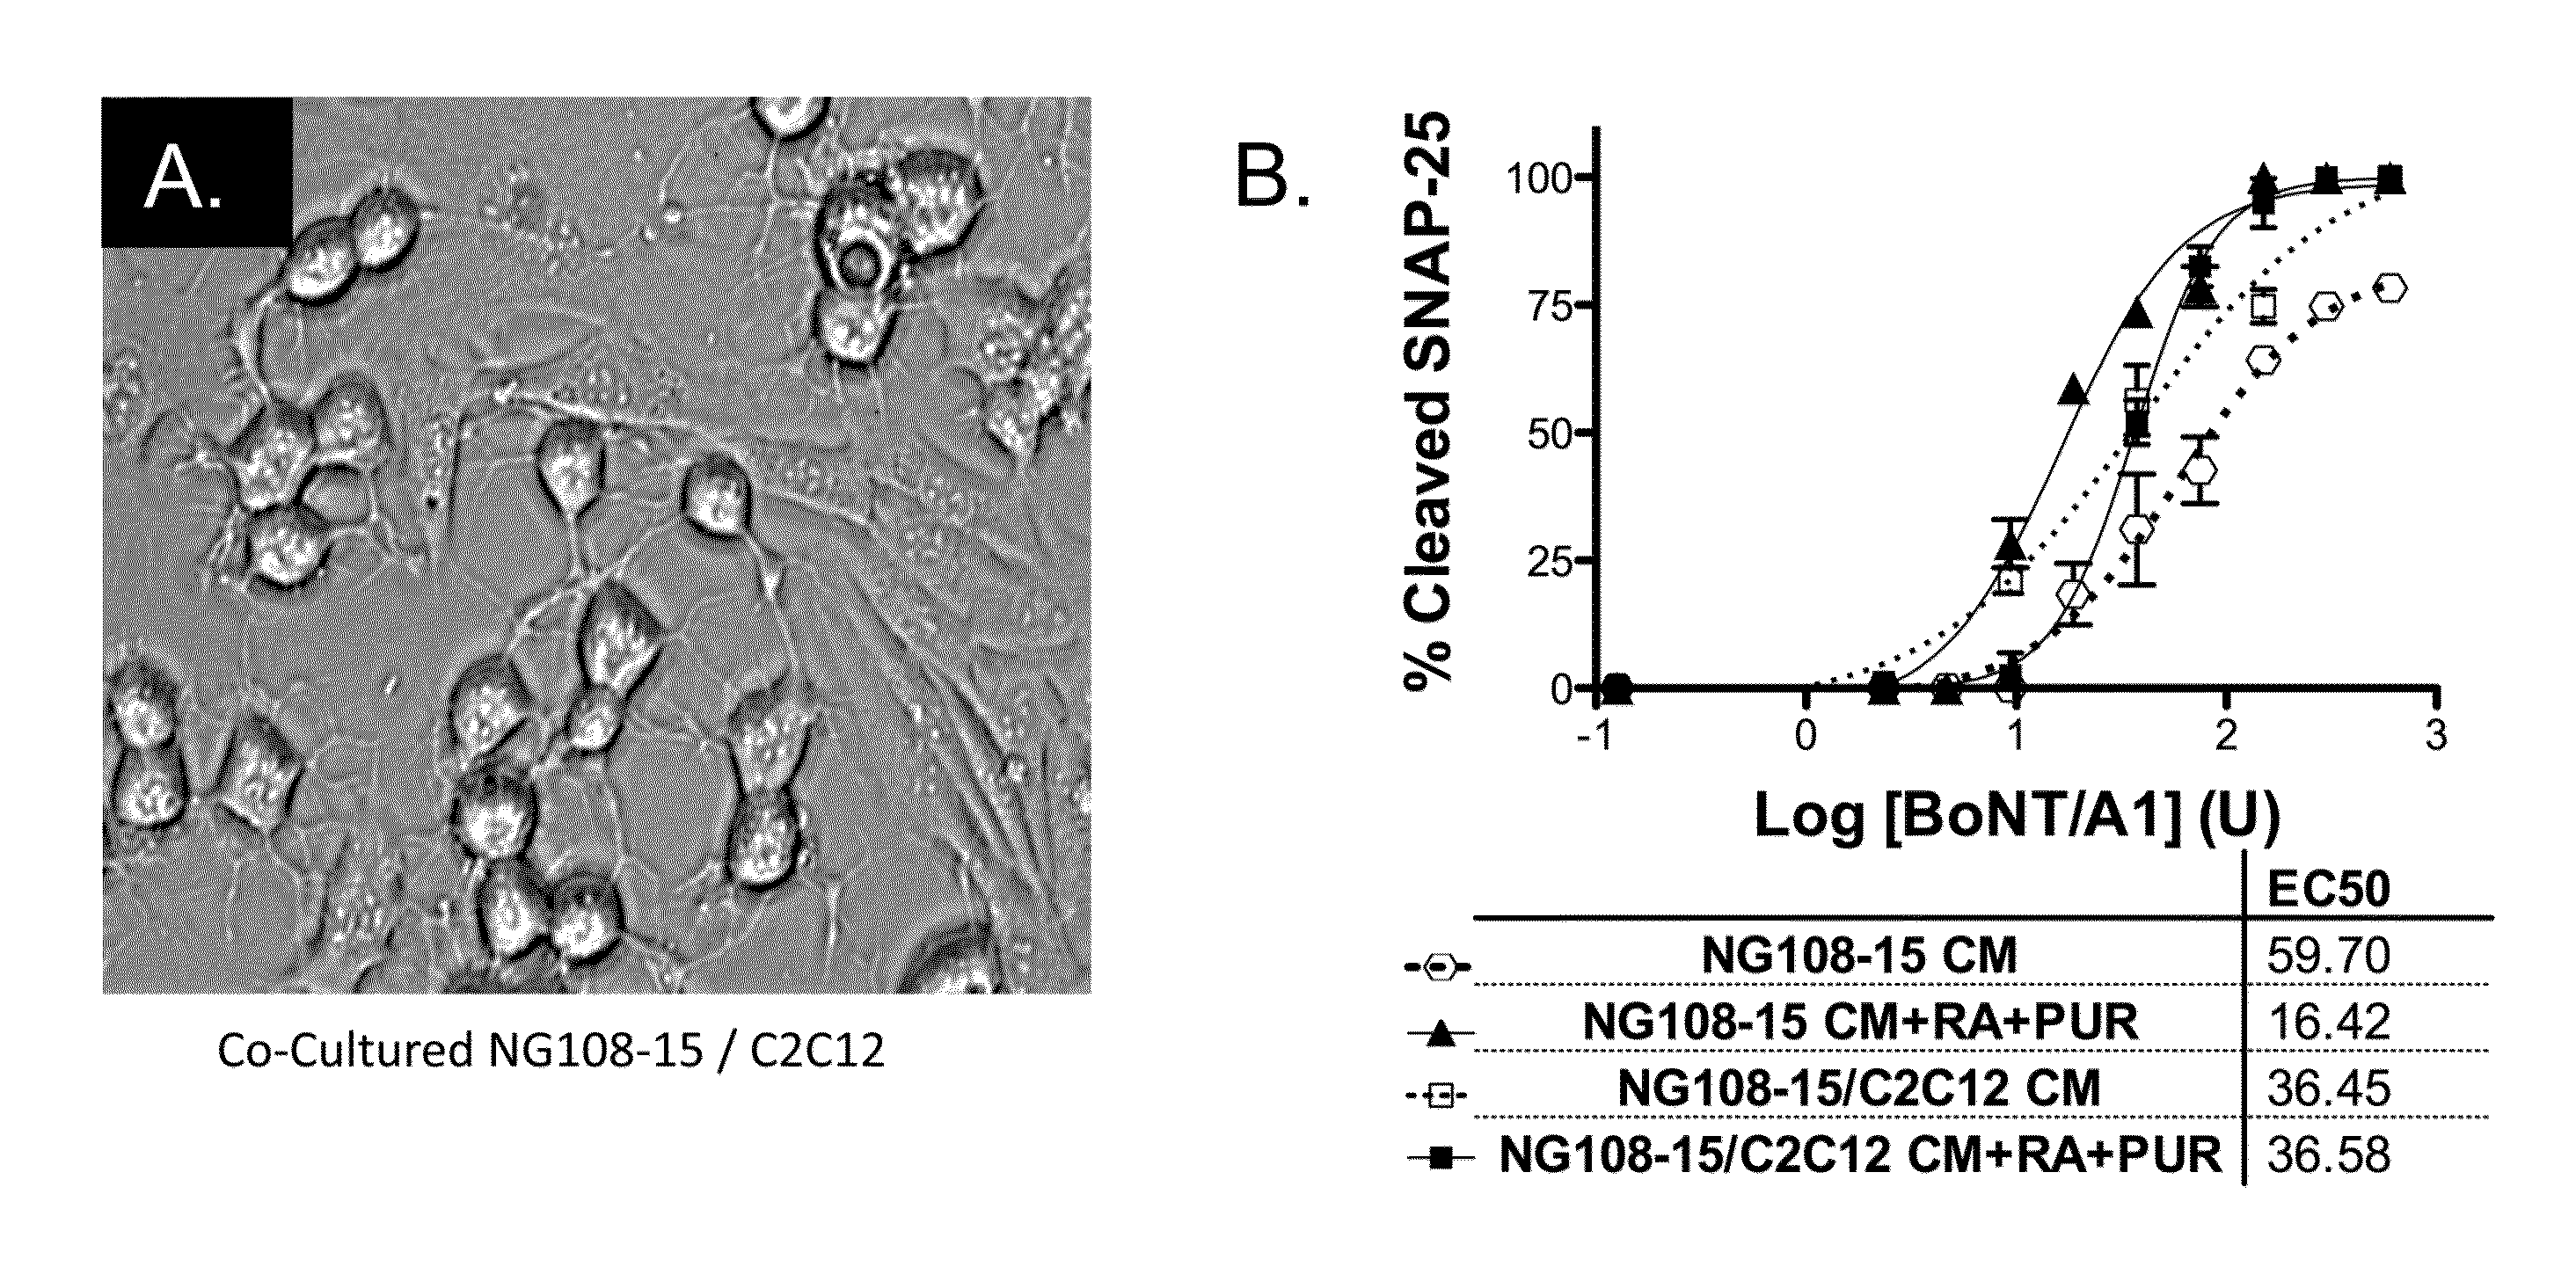 Compositions and methods of using differentiated cells sensitized to botulinum neurotoxin